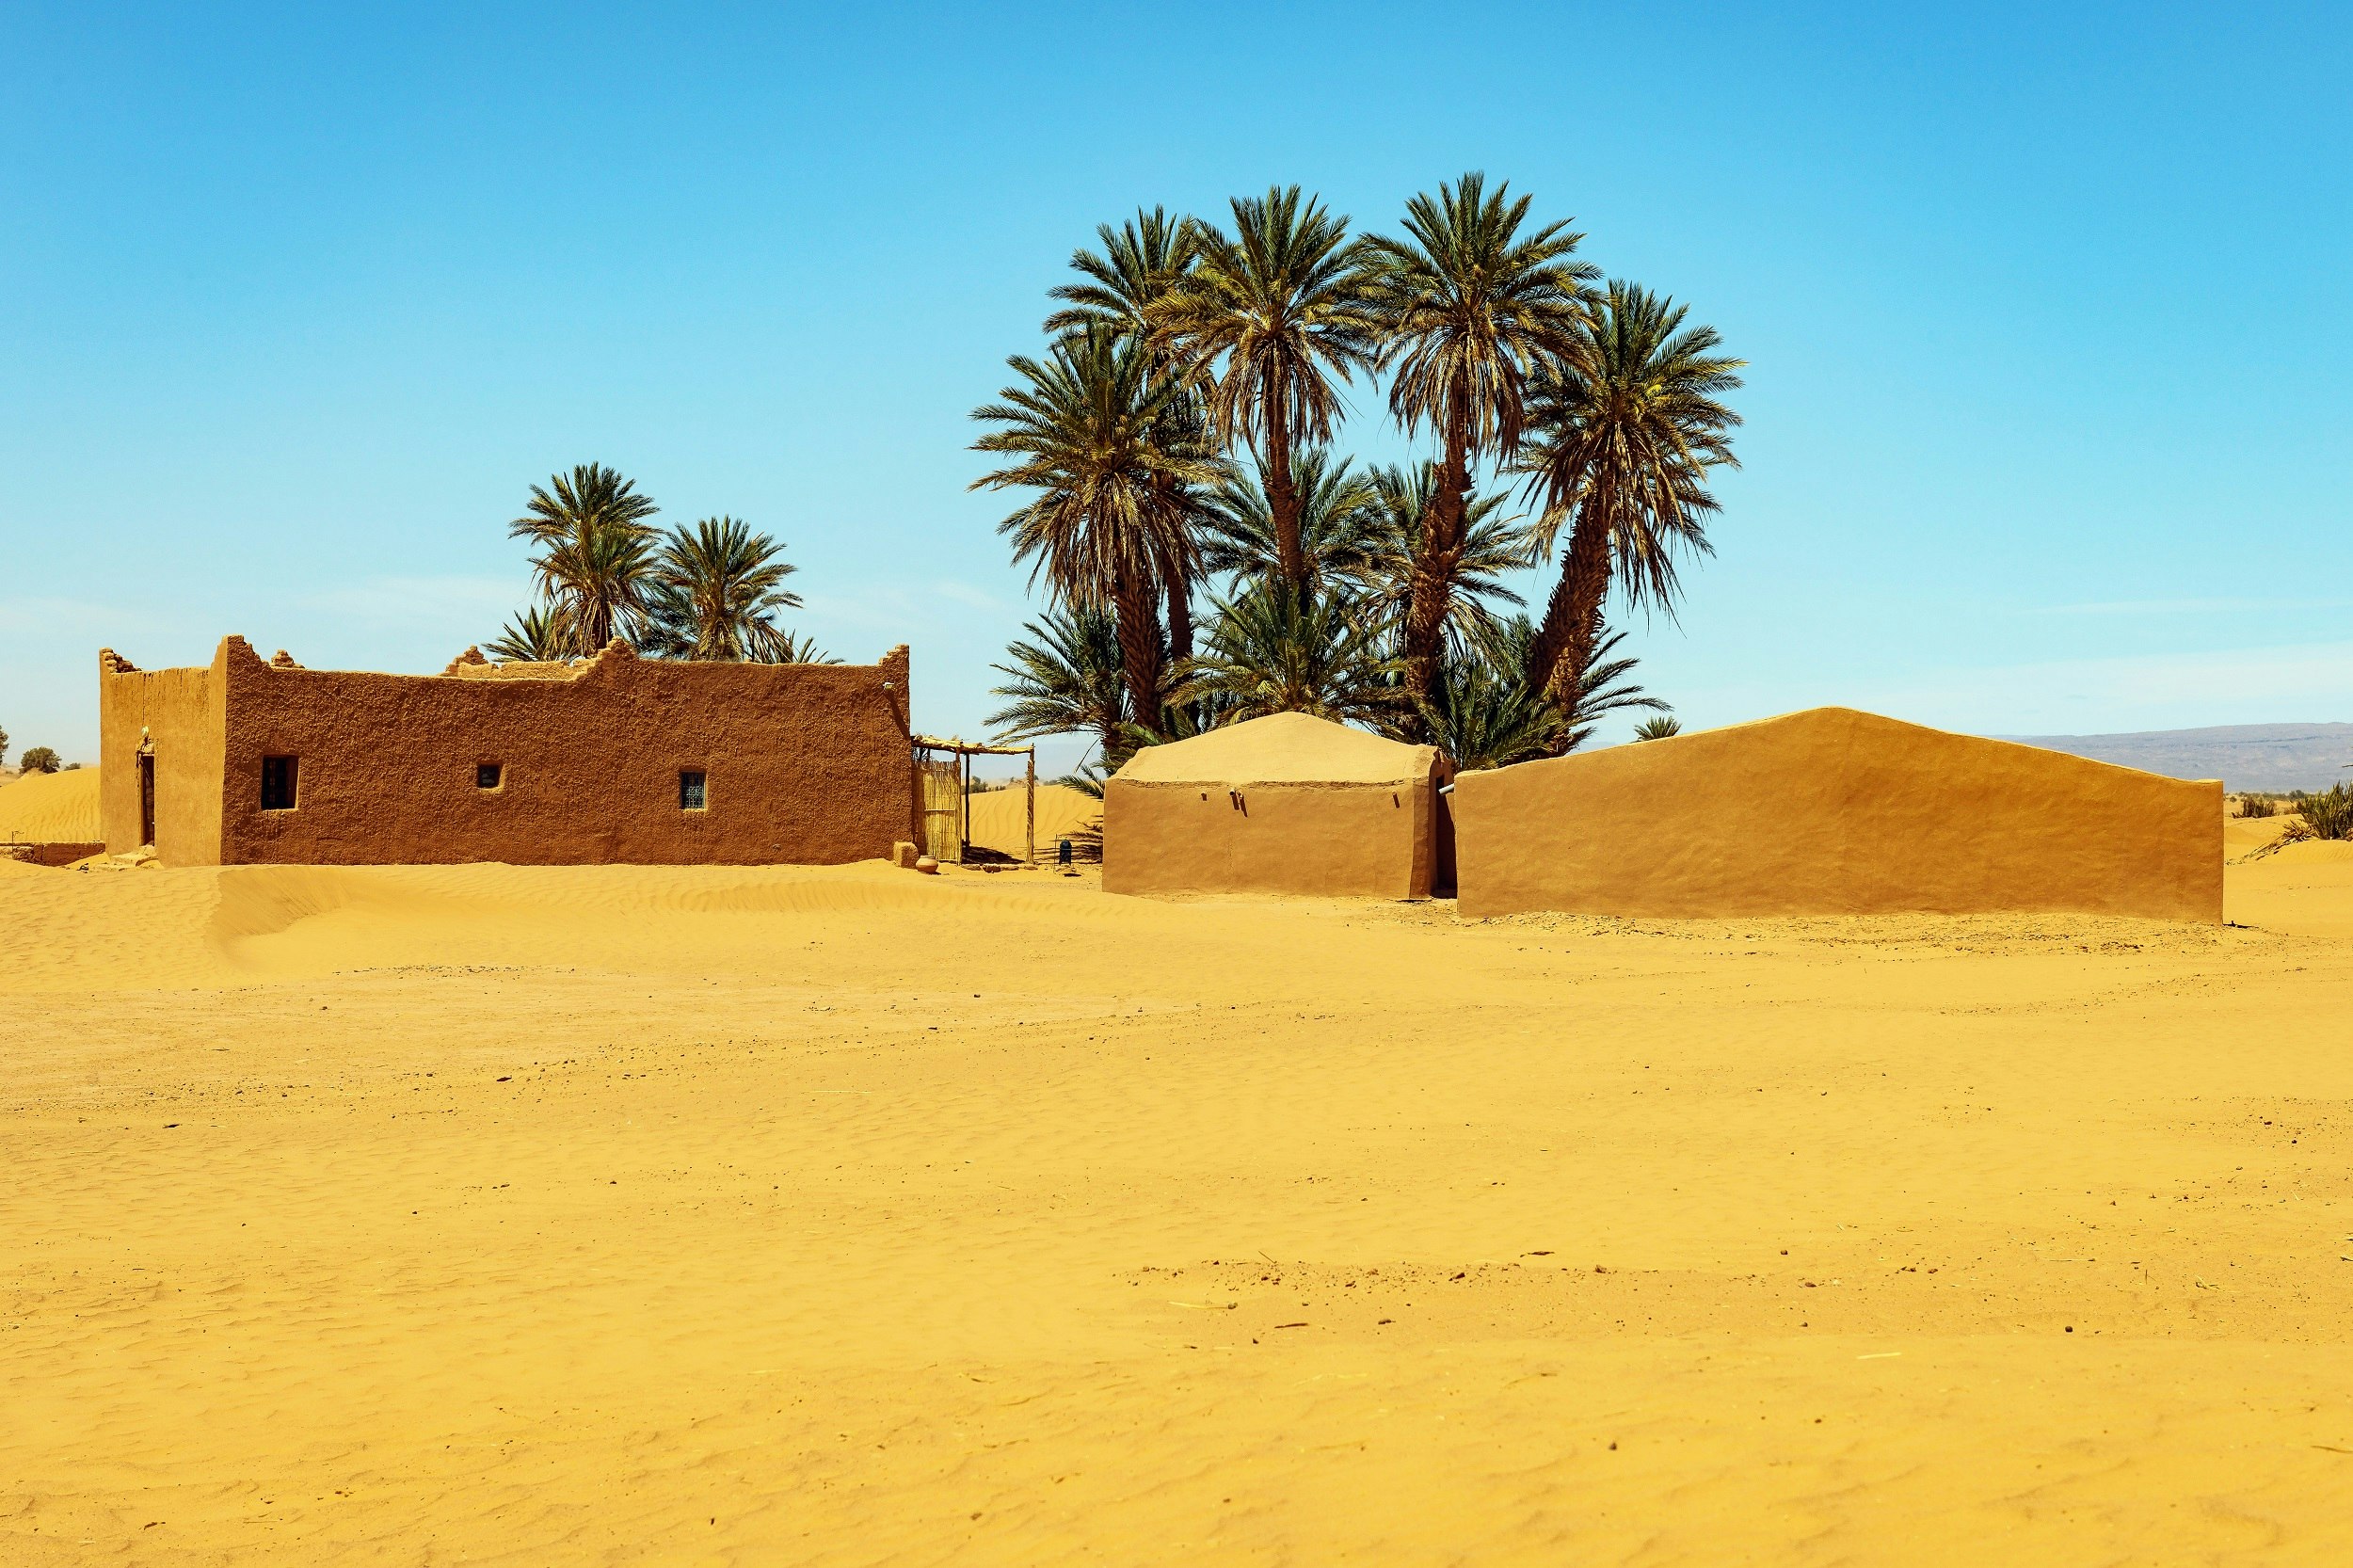 Three mud-brick buildings sit around a stand of palms in the sands of the Sahara desert; a cloudless sky hangs over it all.